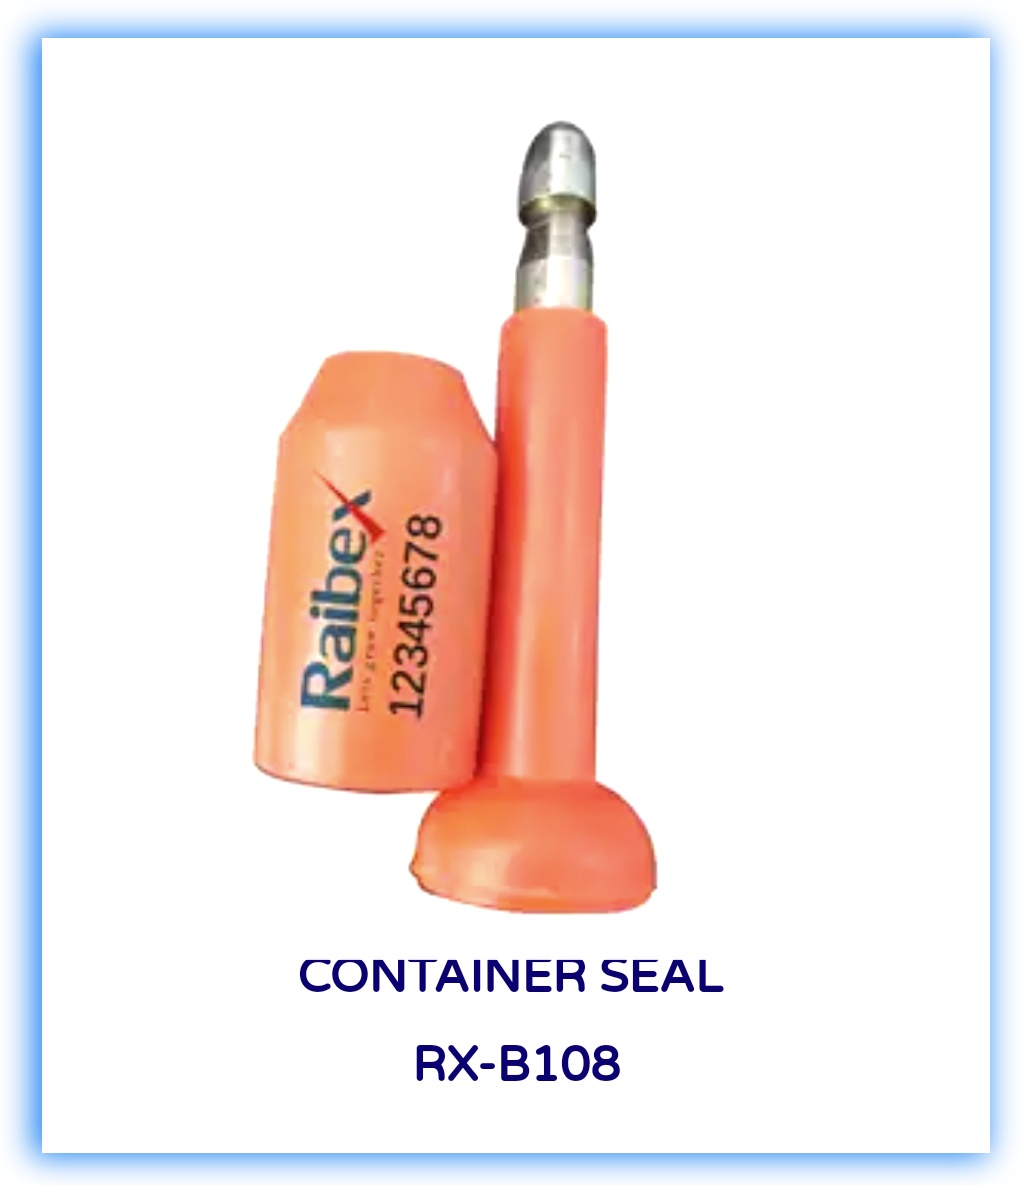 CONTAINER SEAL